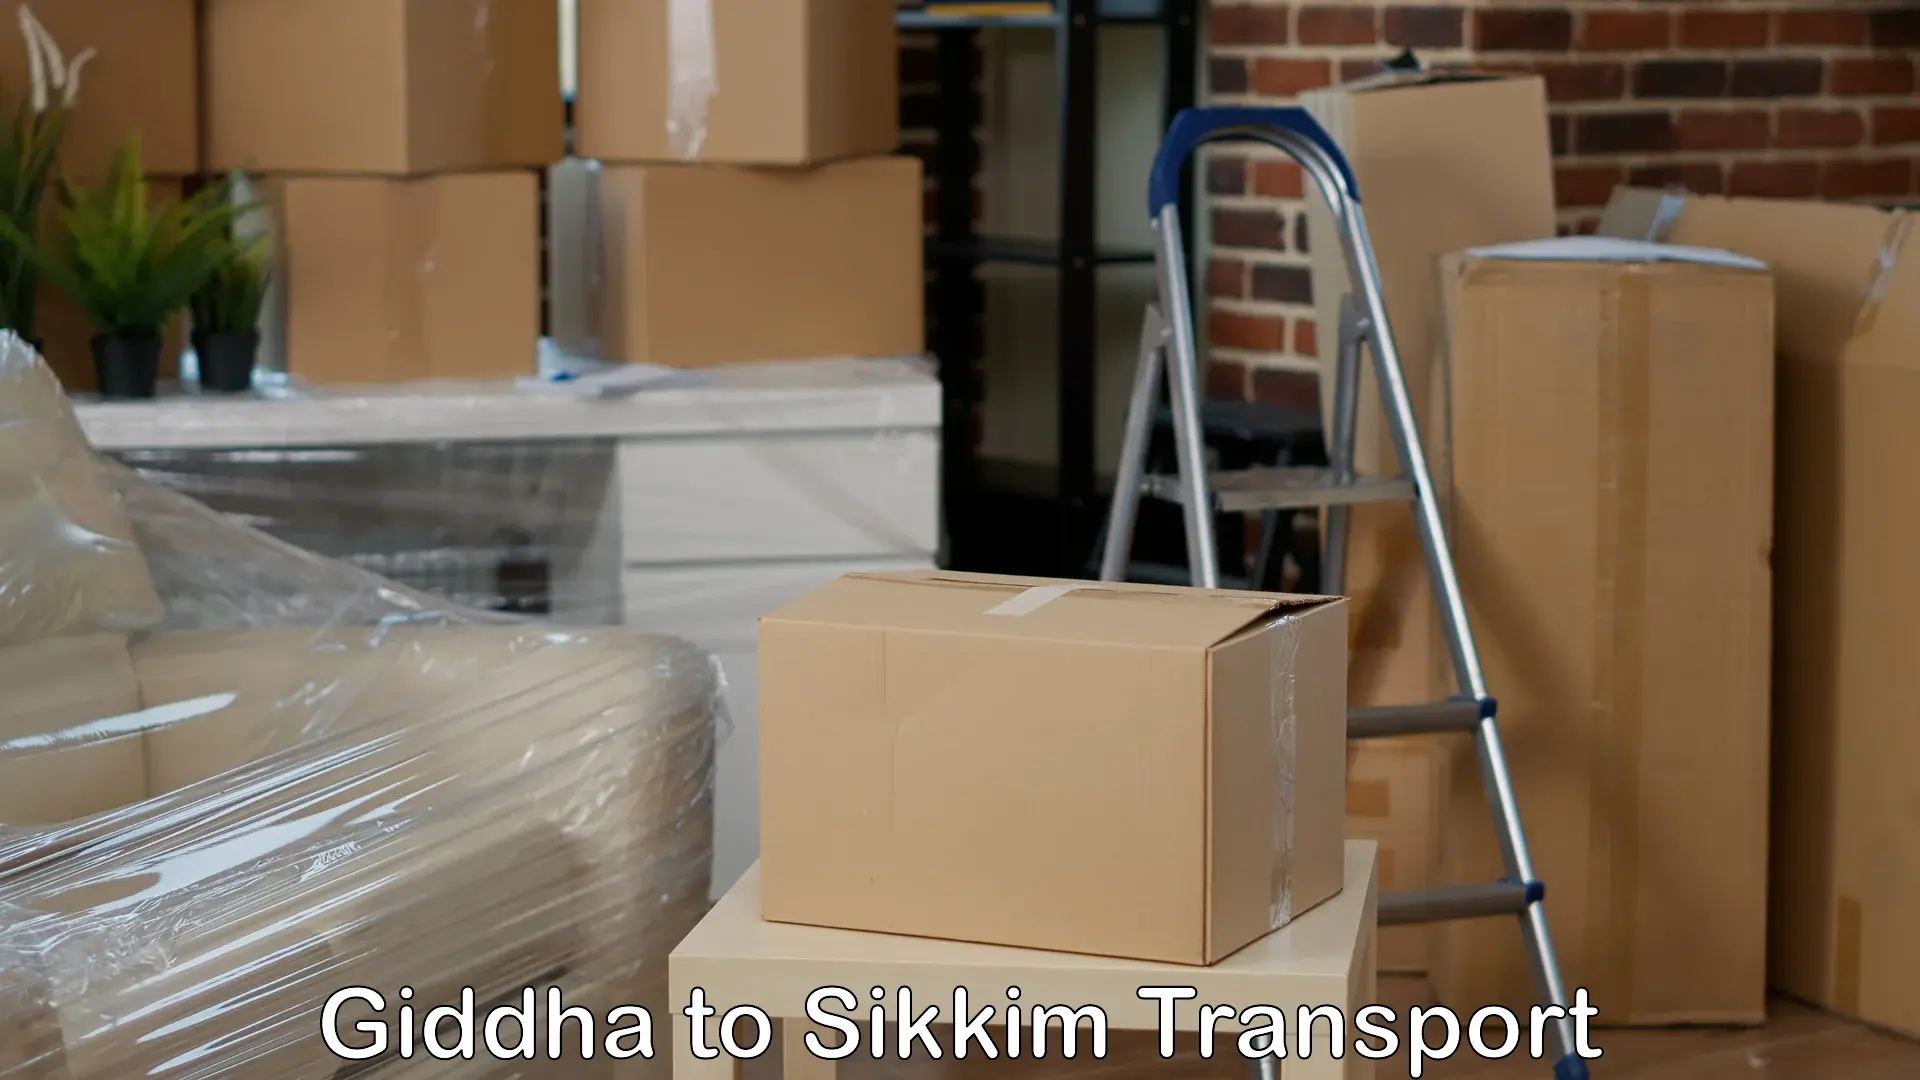 Nearby transport service Giddha to South Sikkim